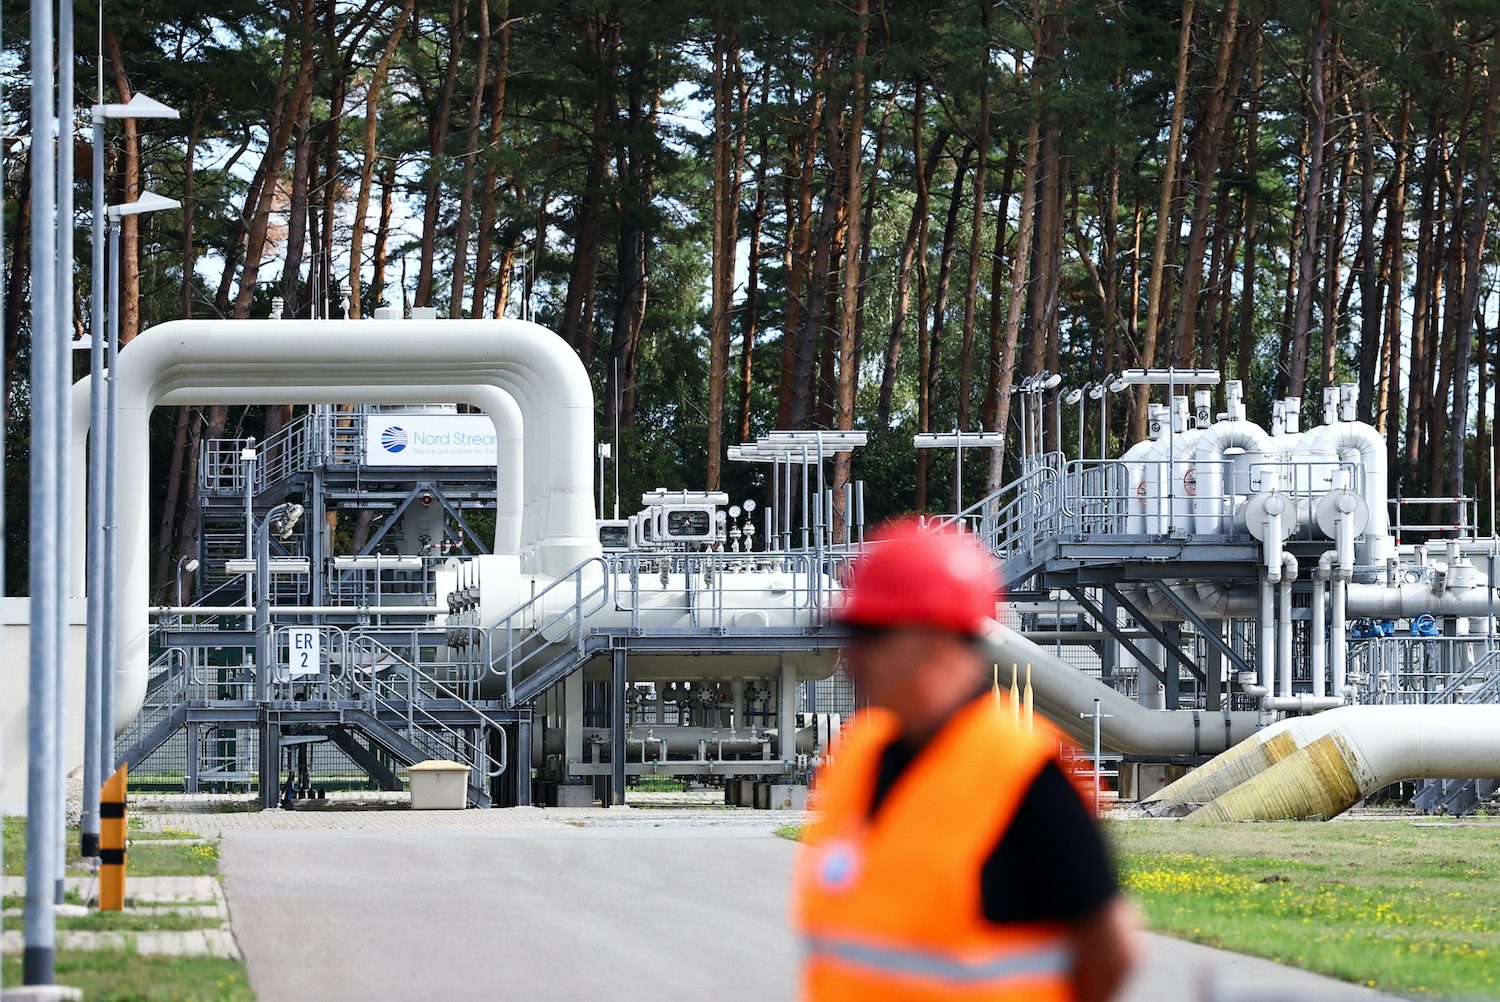 Russia blames Europe for gas crisis, warns West of oil retaliation